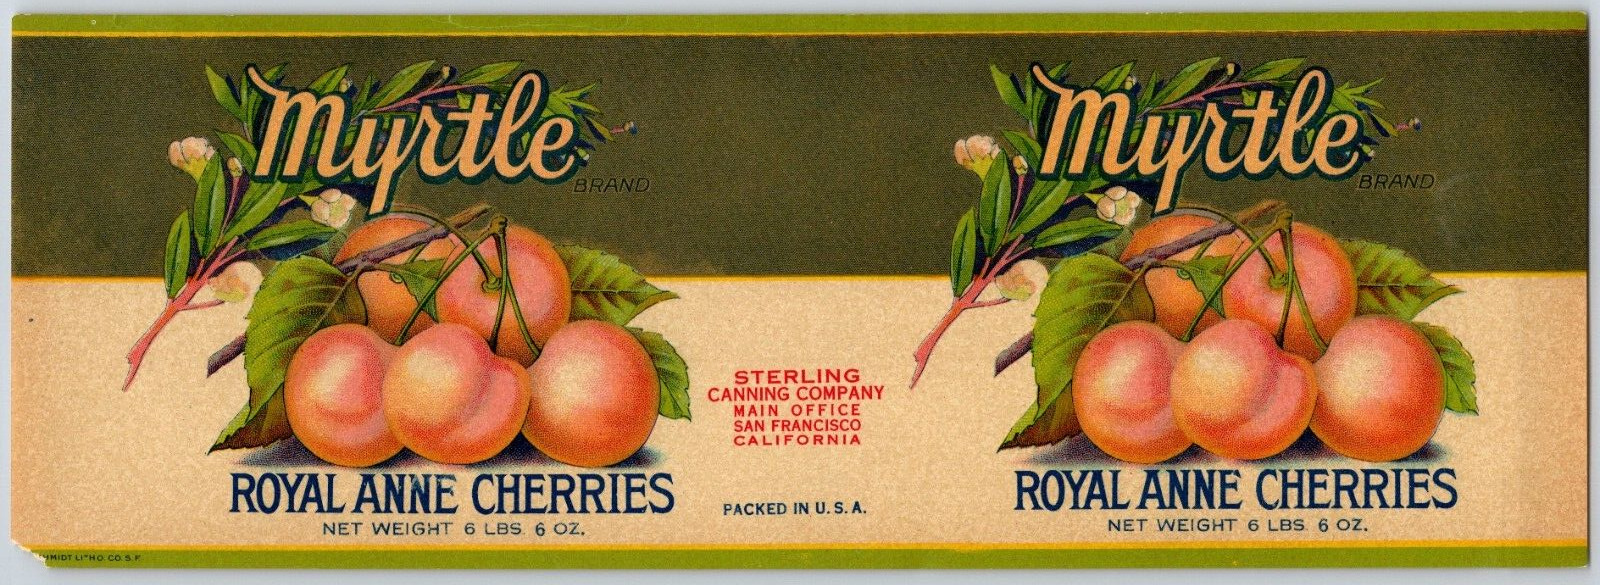 Royal Anne Cherries Myrtle Brand Sterling Canning Co. Paper Can Label - c1930\'s